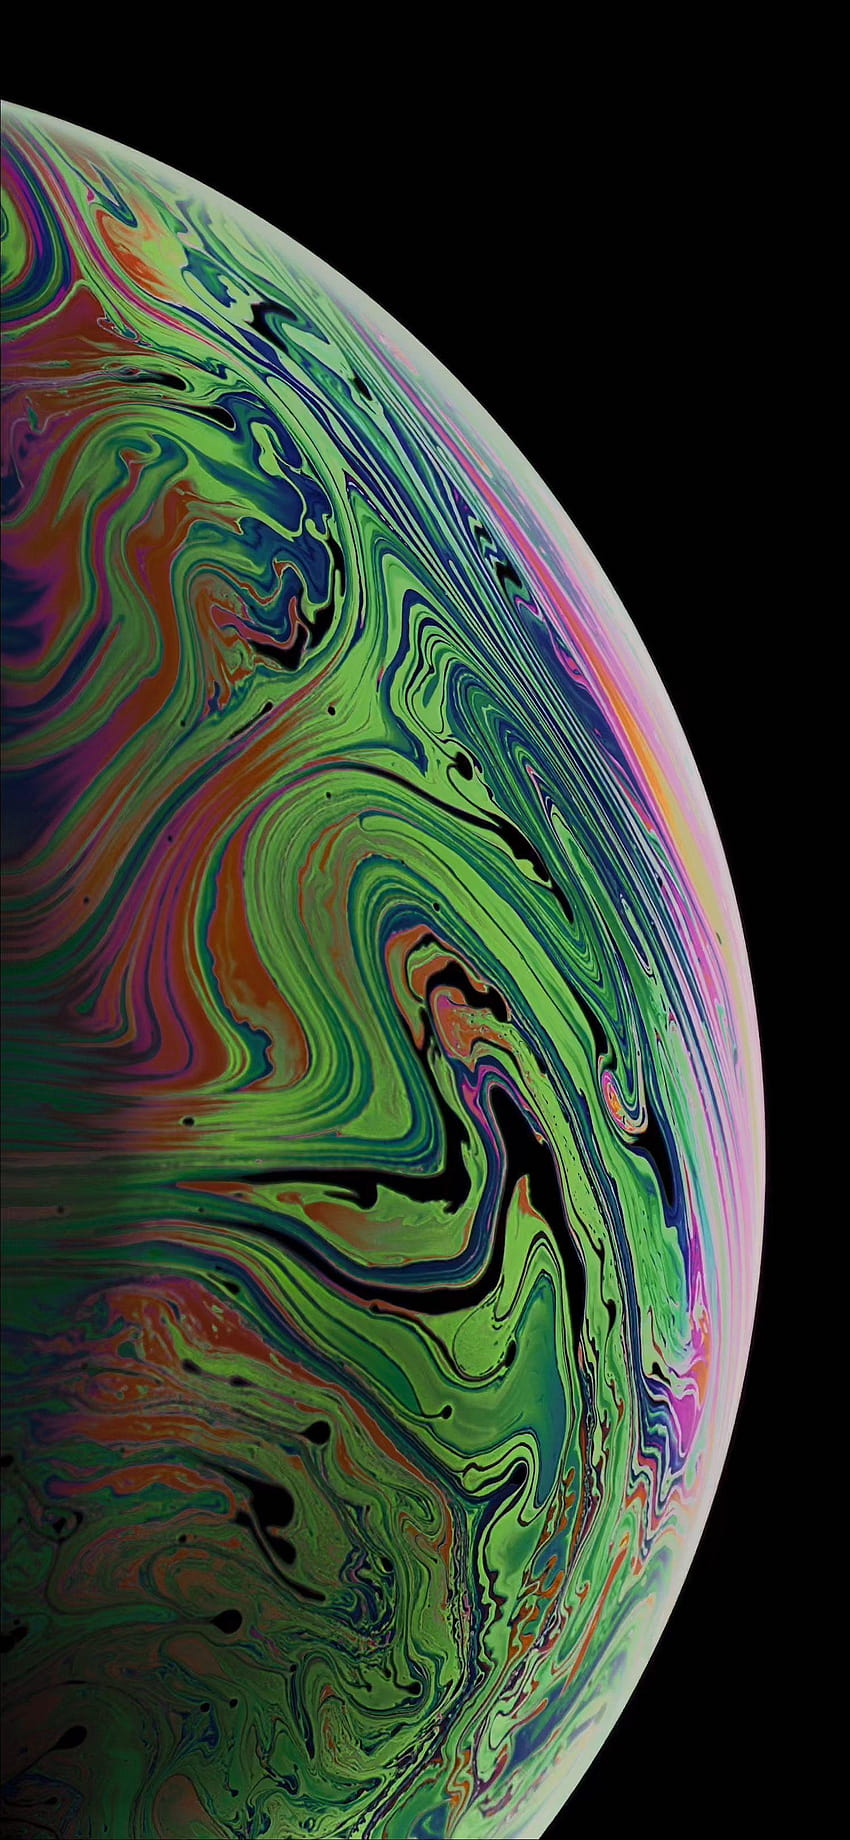 the new iPhone Xs and iPhone Xs Max right here, iphone xs HD phone wallpaper